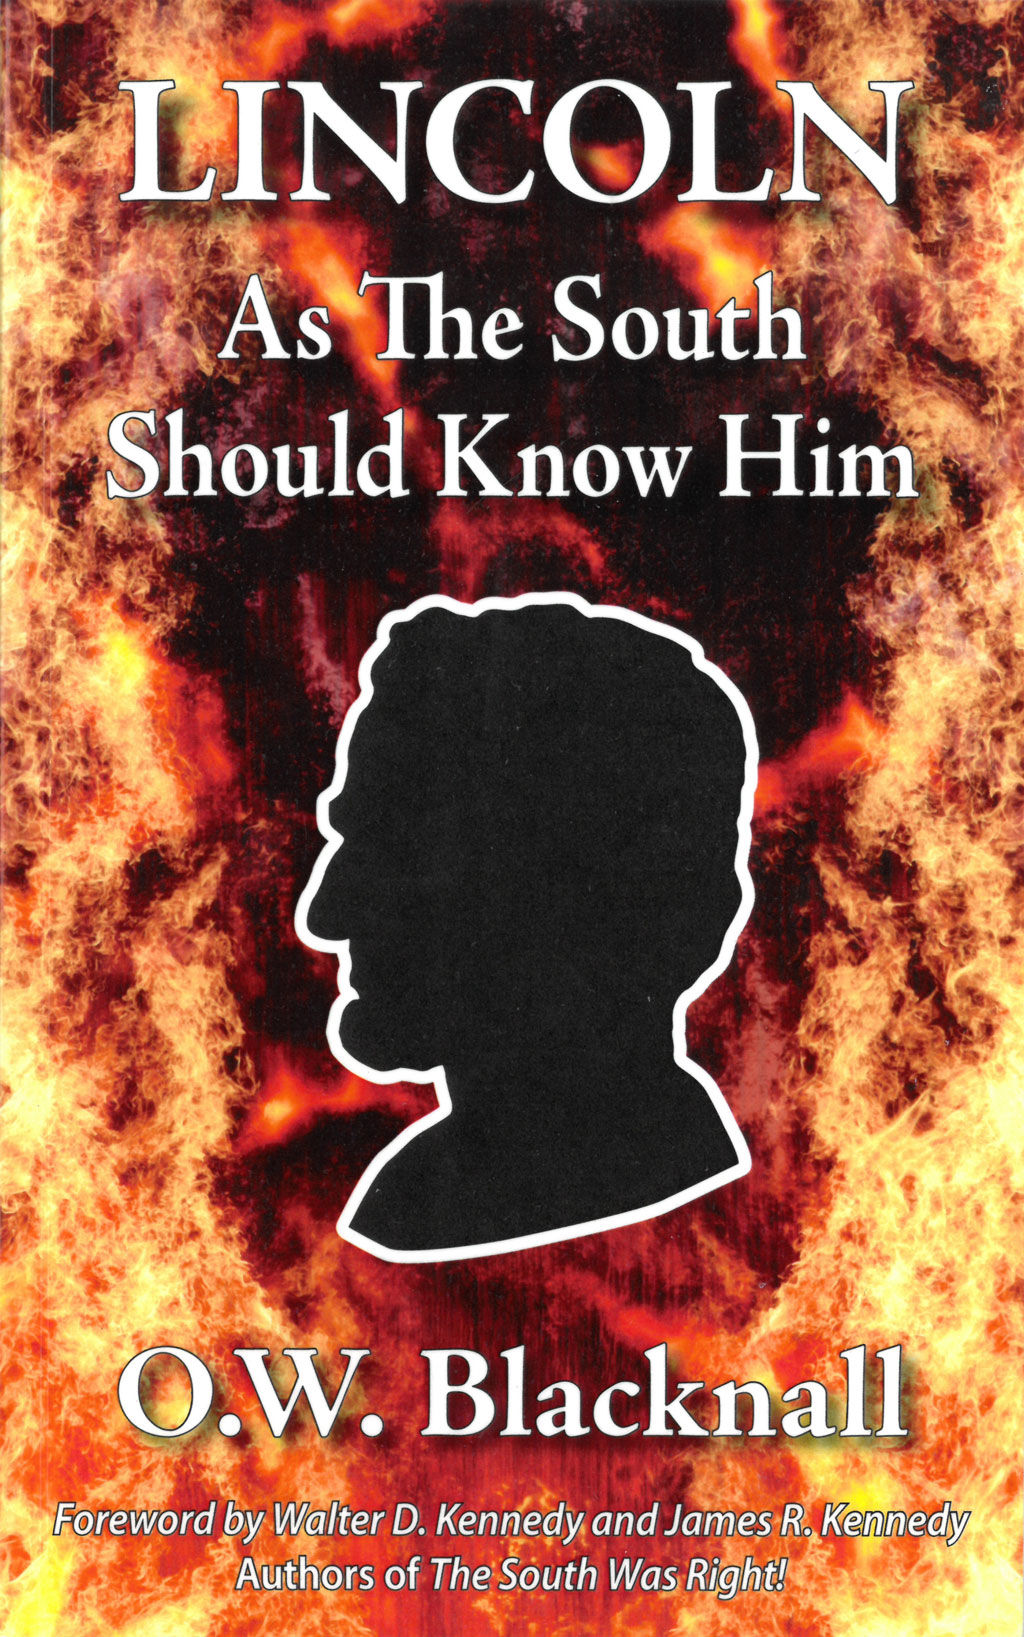 Lincoln As the South Should Know Him – Southern Legal Resource Center